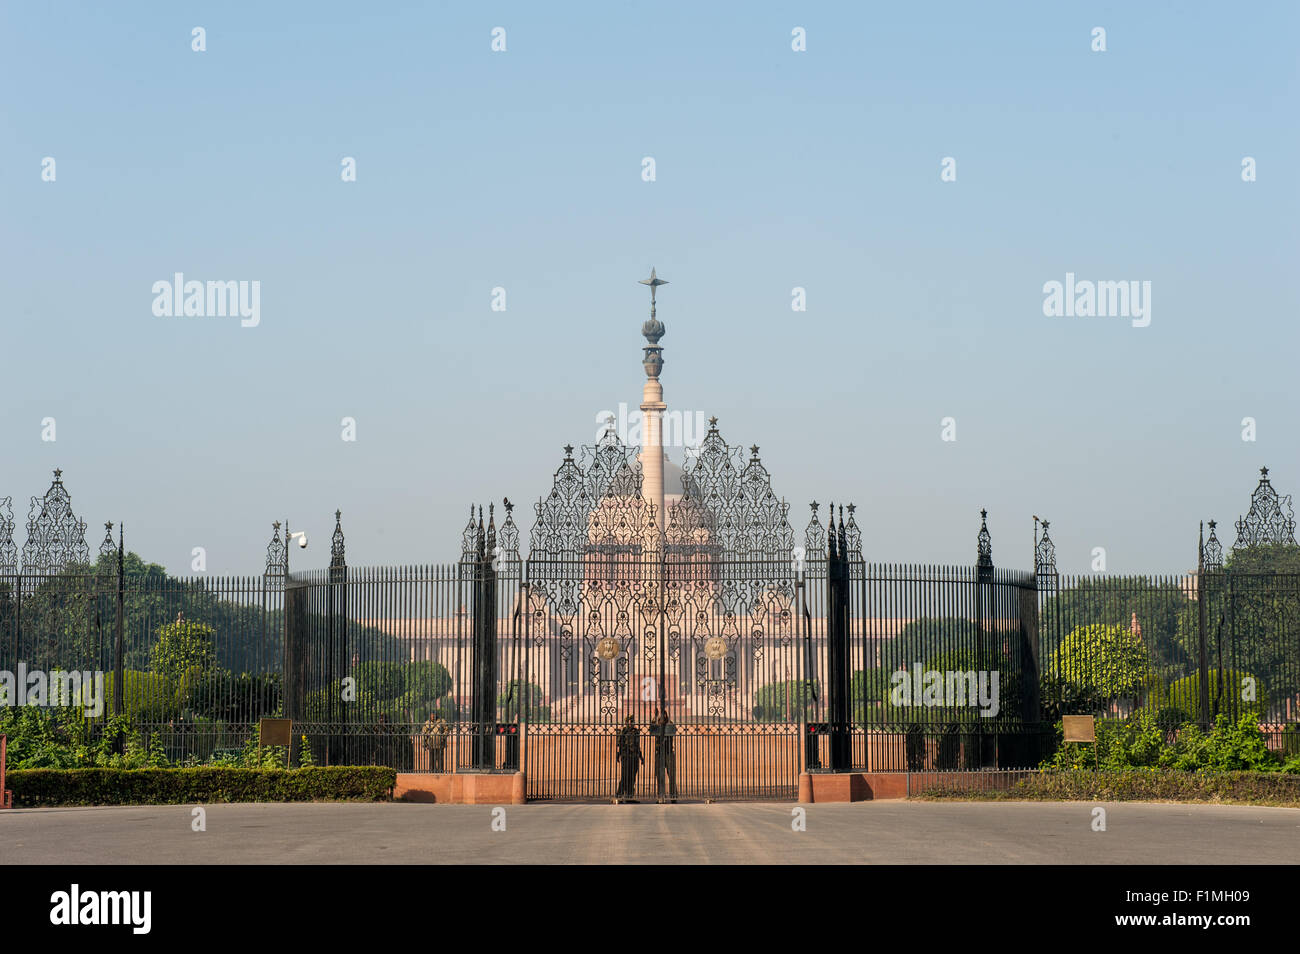 Delhi, India. Rashtrapati Bhavan, the Indian President's official residence, formerly the British Viceroy's residence. Gates. Designed by Edwin Landseer Lutyens, early 20th century. Stock Photo